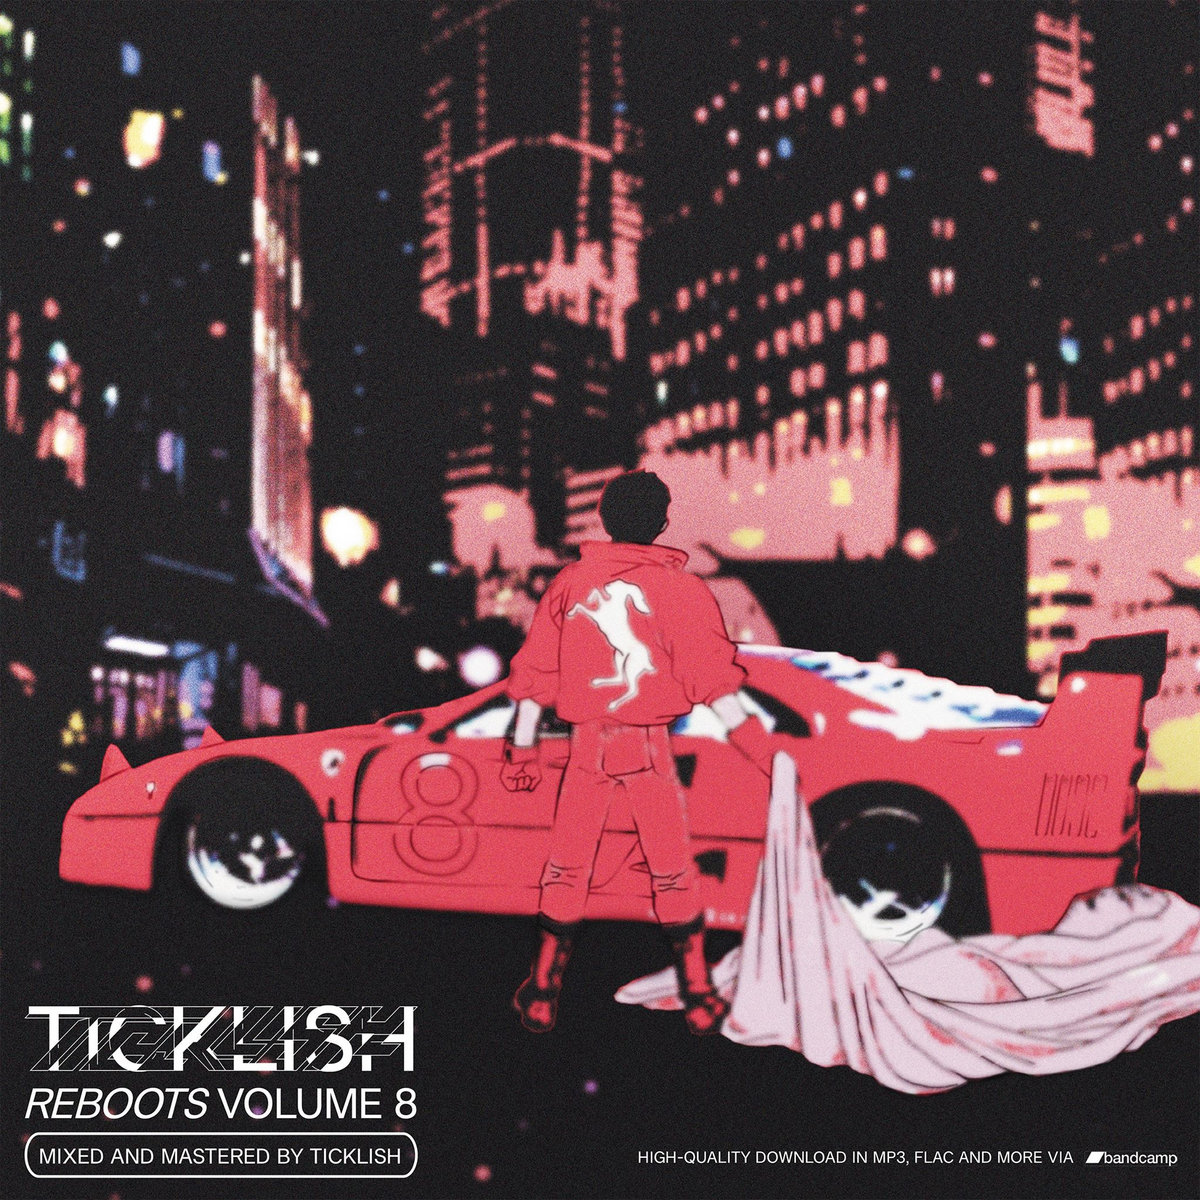 Ticklish drops some new heat in form of "Reboots Vol. 8"